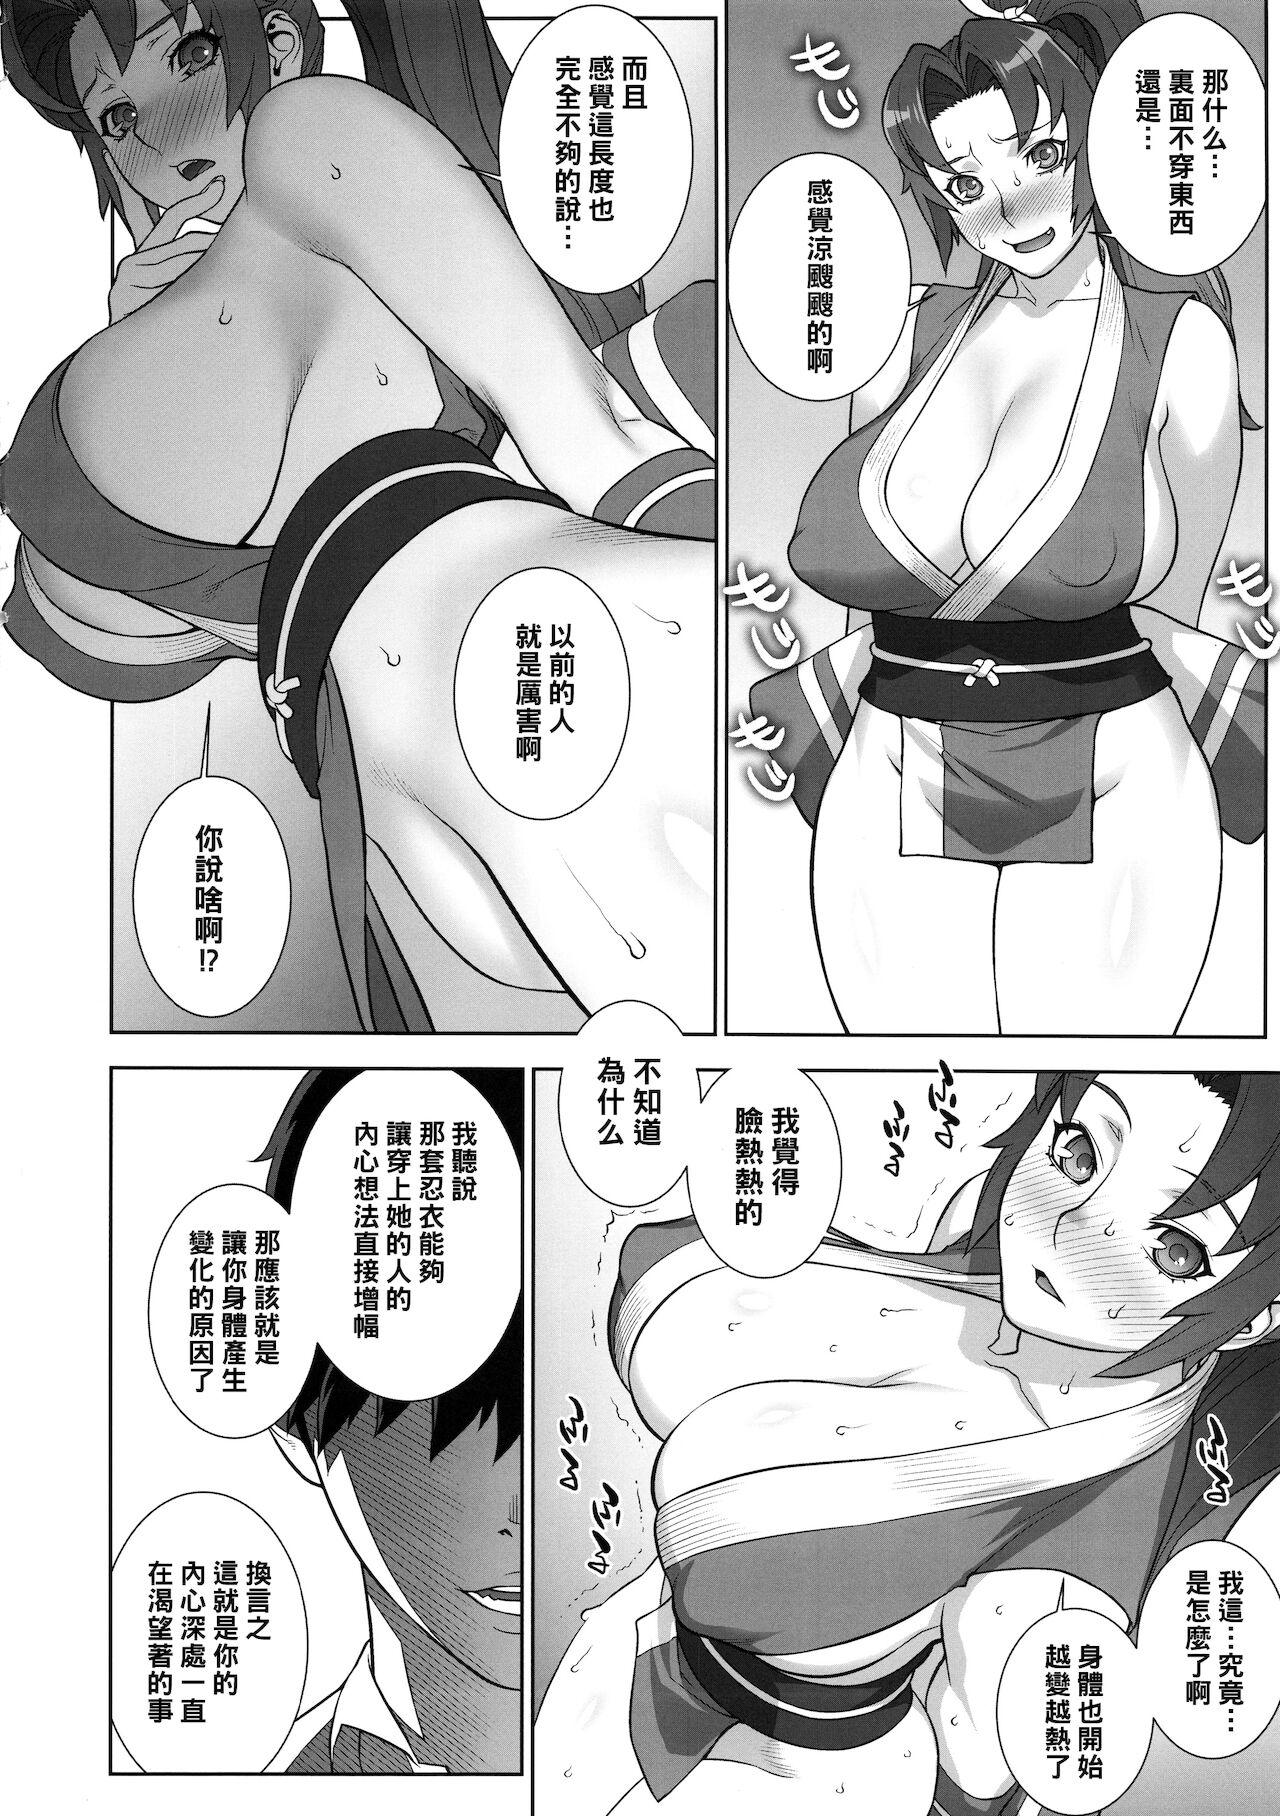 Home Domidare Kachousen - King of fighters Point Of View - Page 7